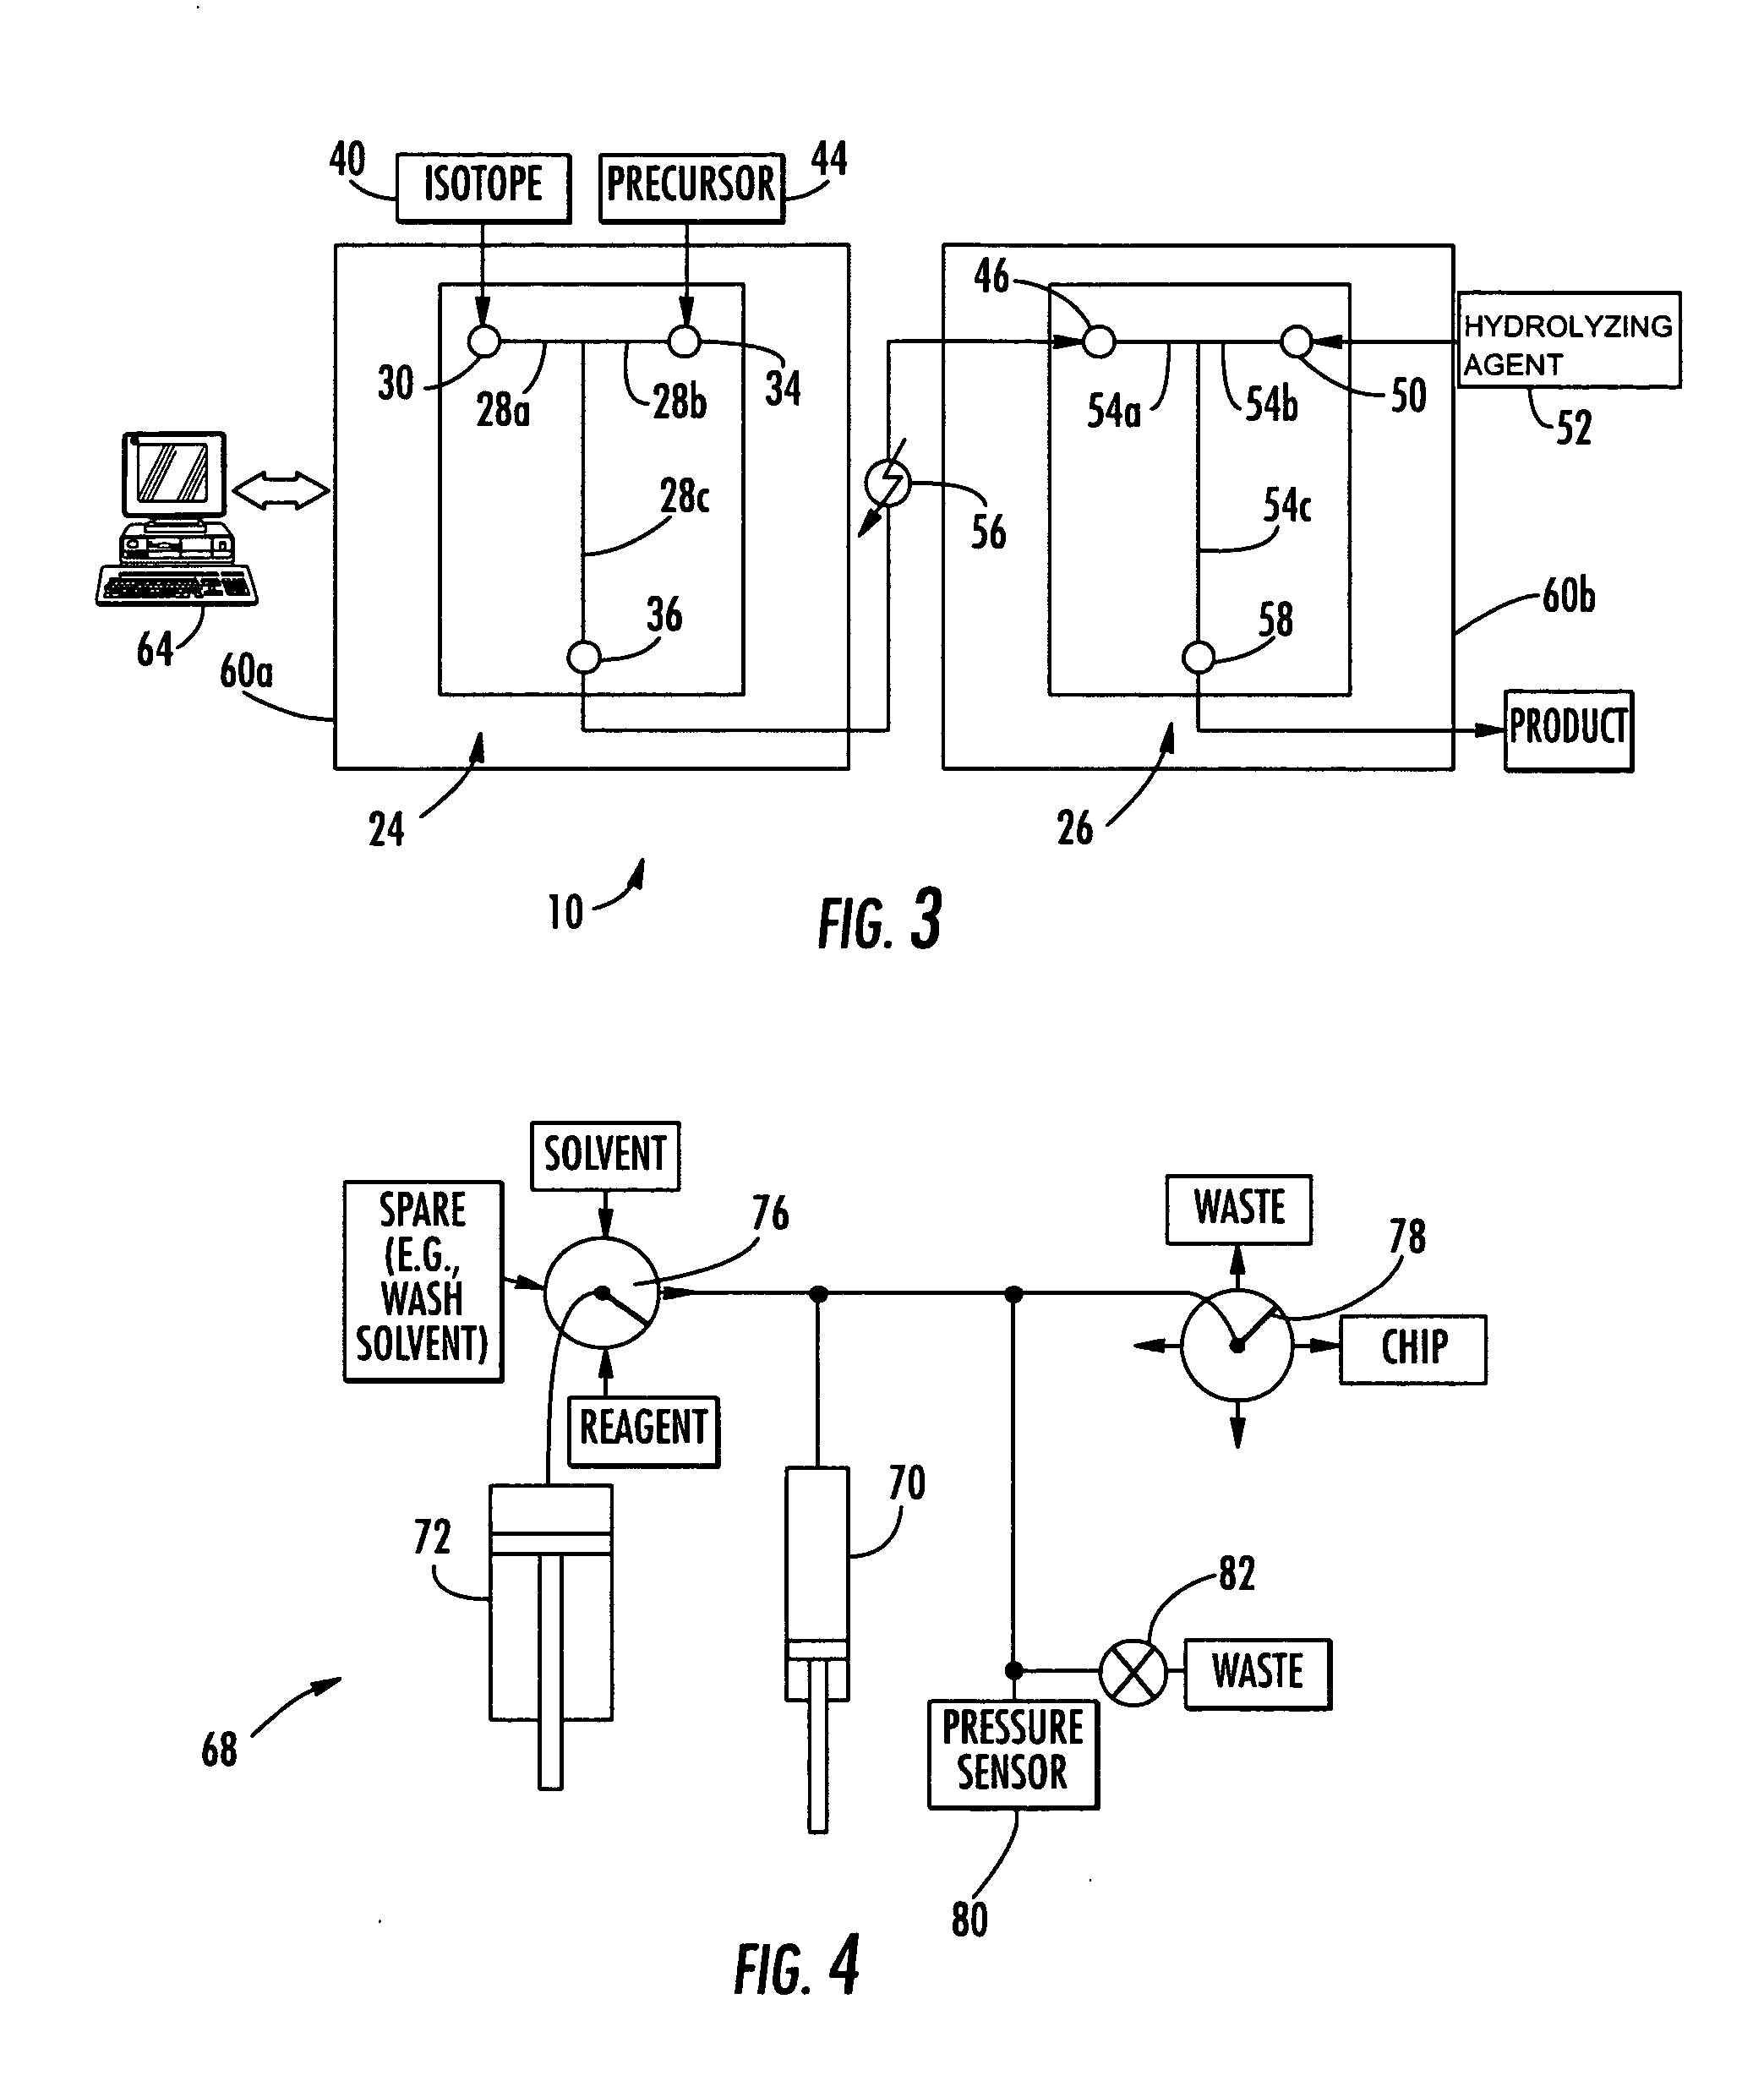 Microfluidic apparatus and method for synthesis of molecular imaging probes